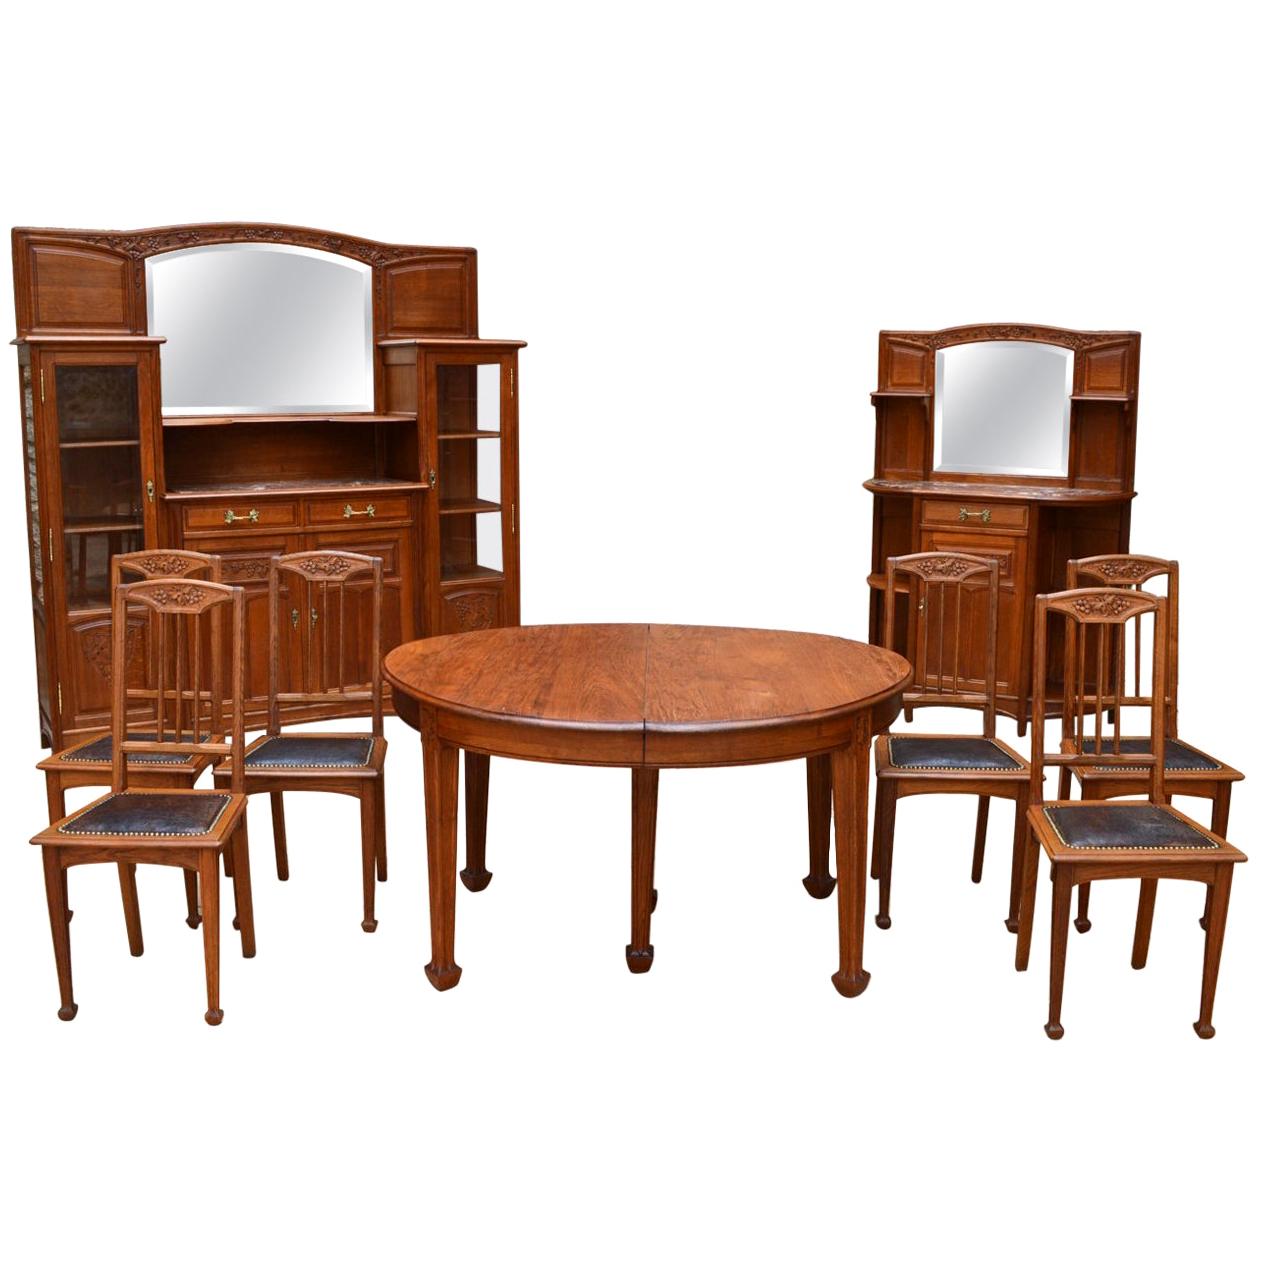 Art Nouveau Oak Carved Dining Room Set by Gauthier Poinsignon, circa 1910 For Sale